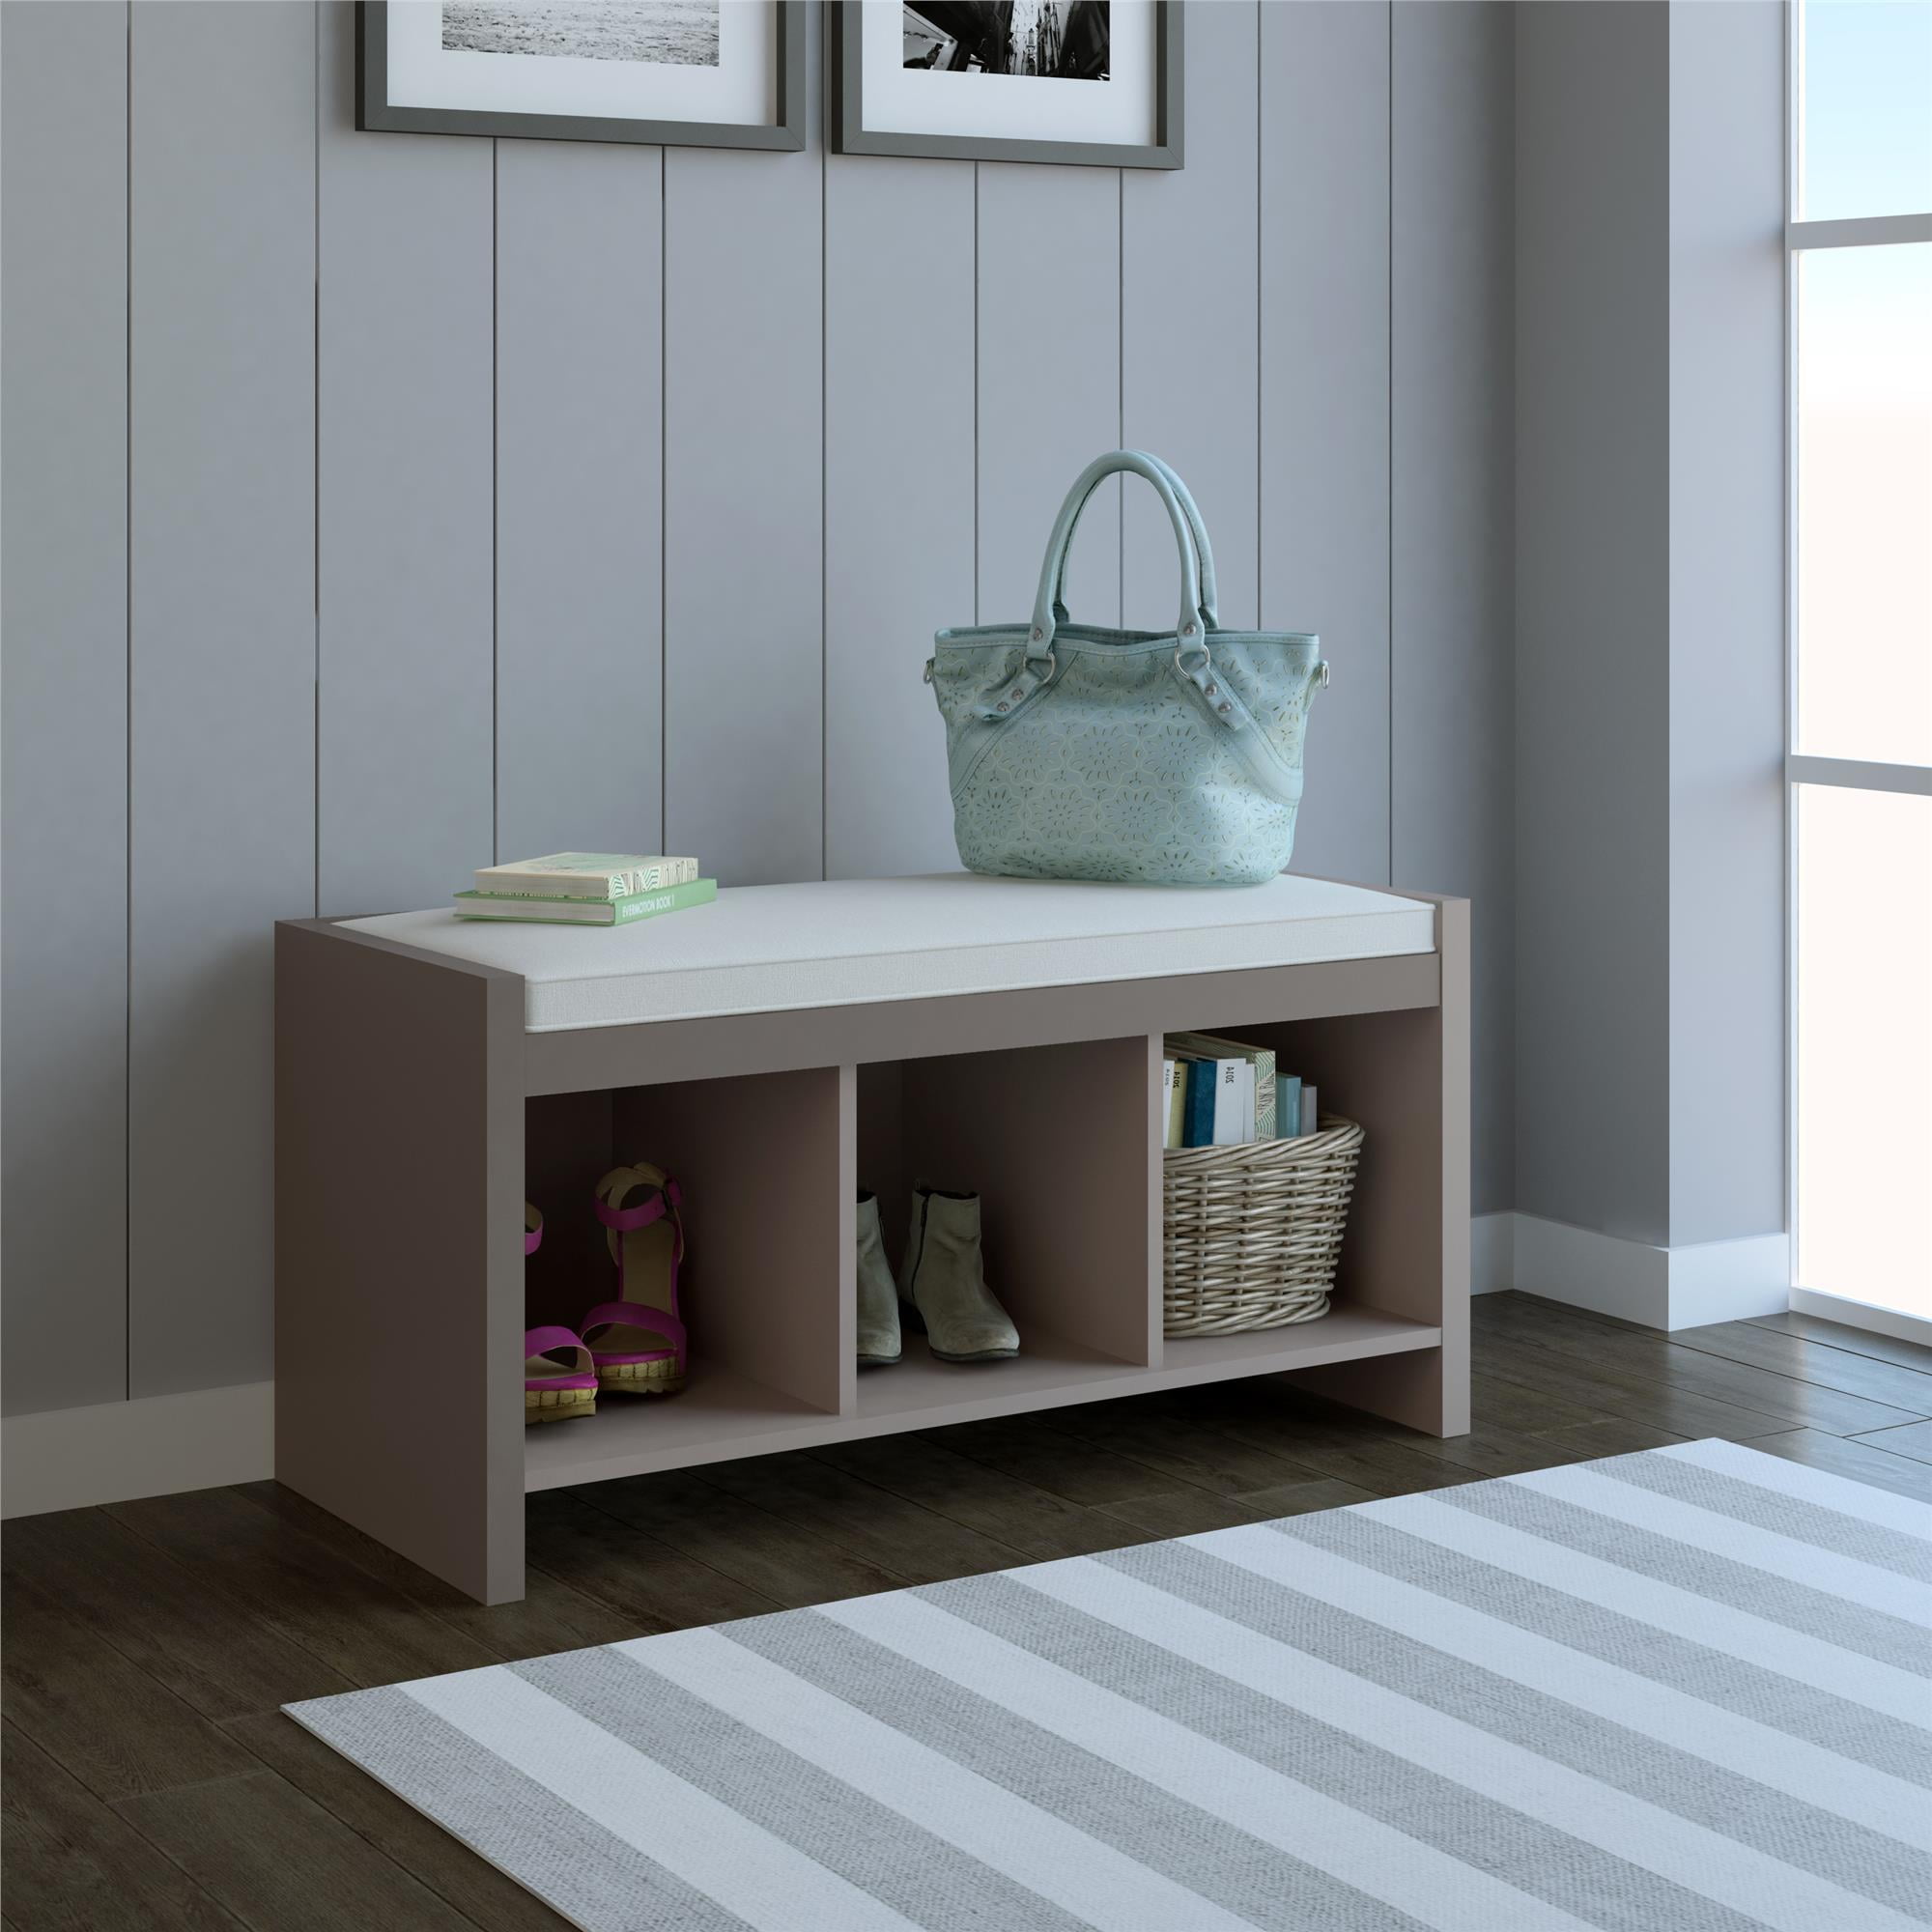 Ameriwood Home Collingwood Entryway Storage Bench with Cushion, Taupe